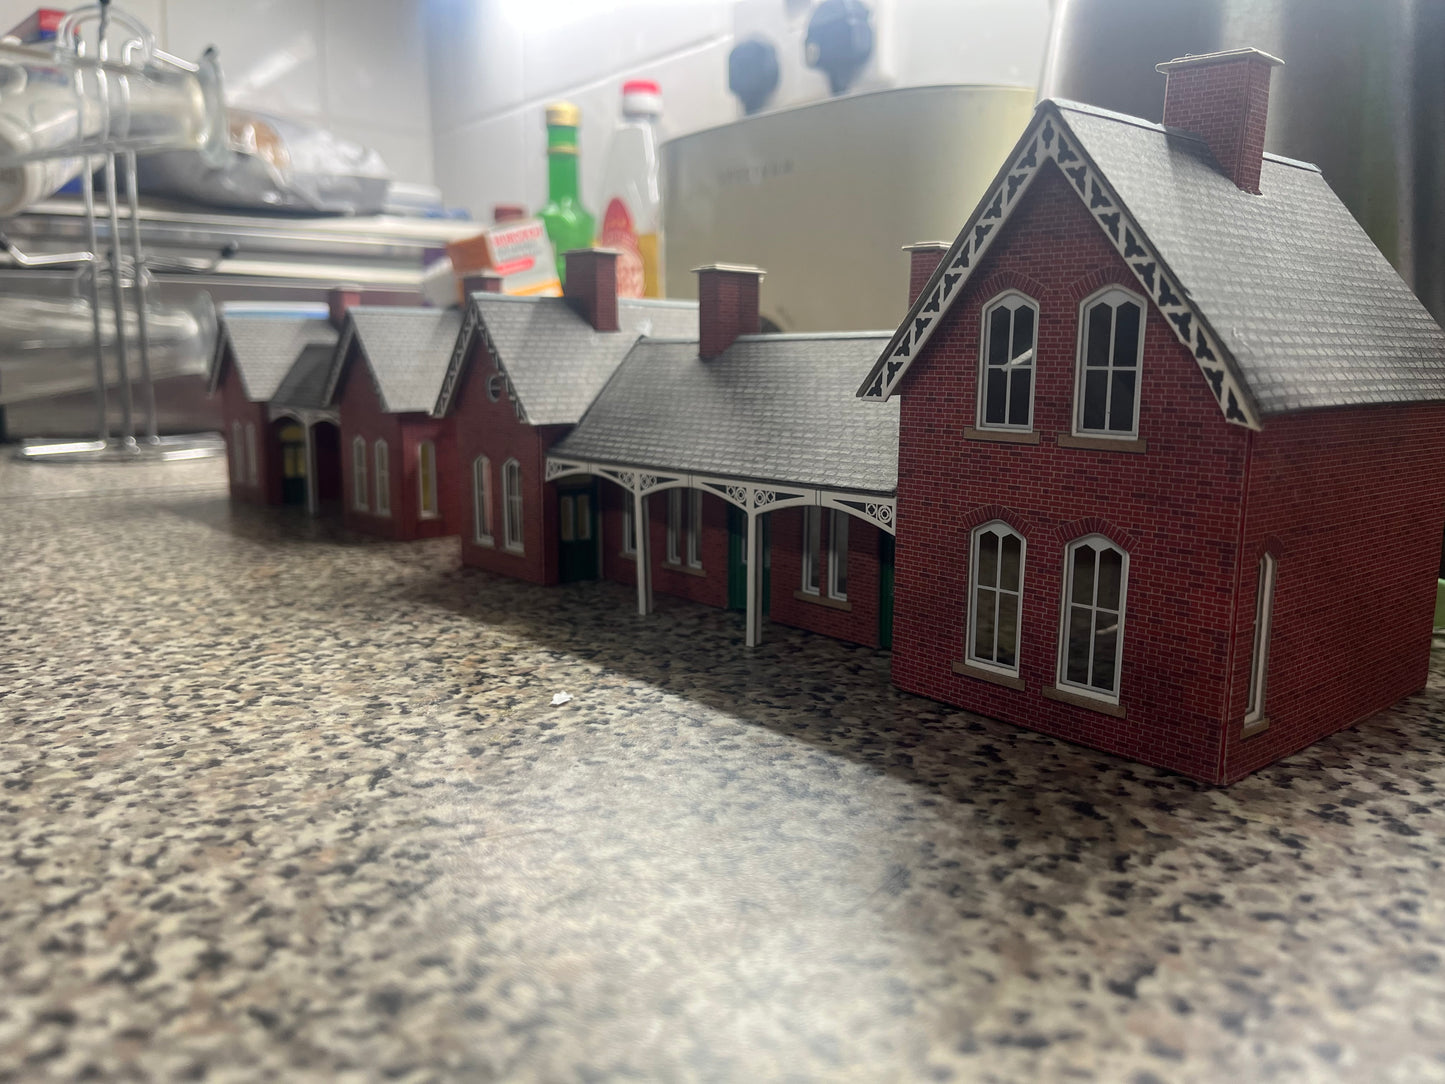 Metcalfe (OO) Country Station Platform 1 and 2 station buildings in Red Brick. pre assembled kit bundle